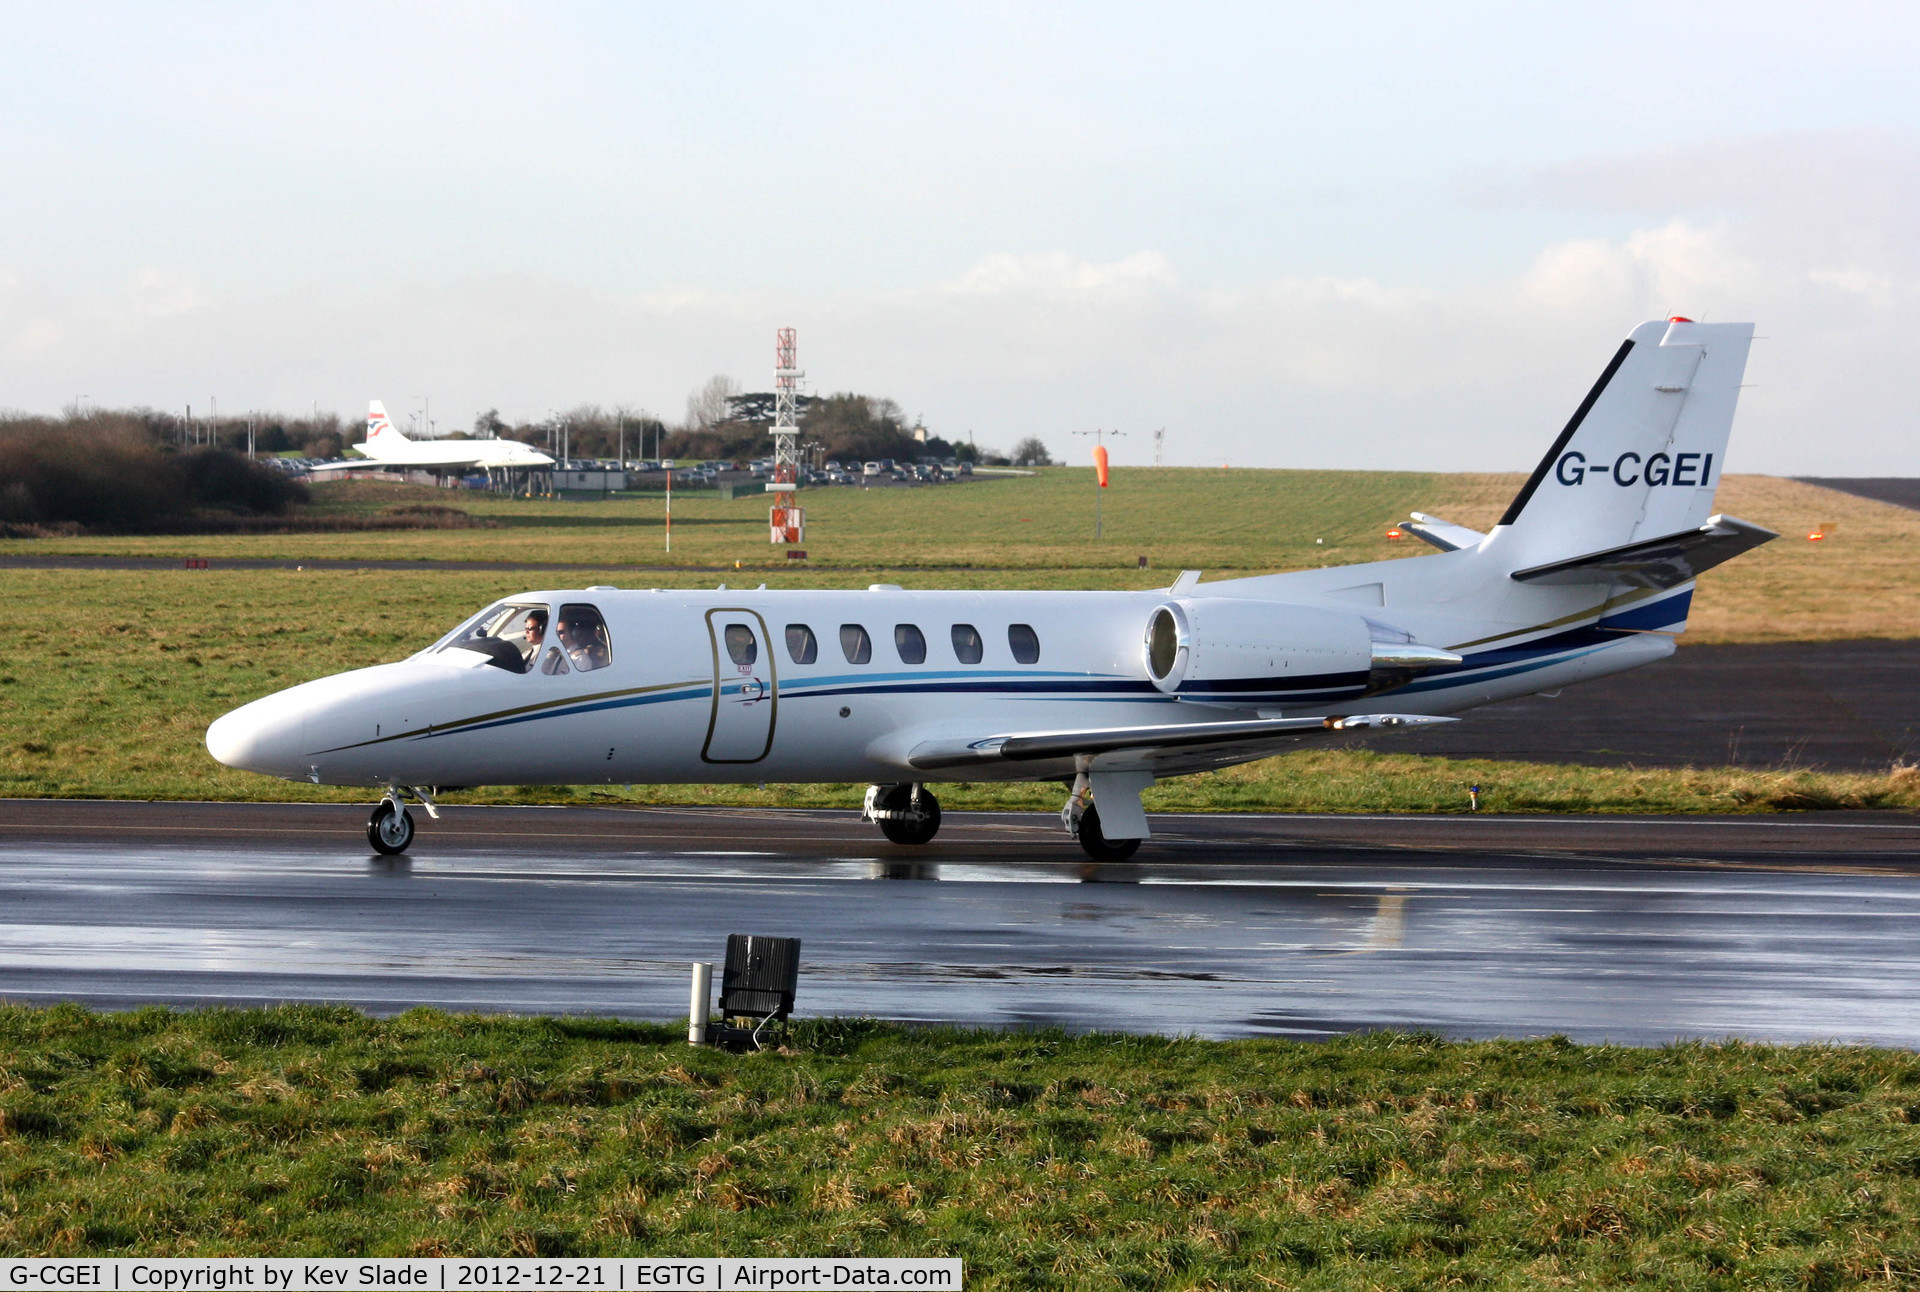 G-CGEI, 2000 Cessna 550 Citation Bravo C/N 550-0951, The final commercial flight to operate to and from Filton taxis in on the last day of operation for this famous and historic airfield.